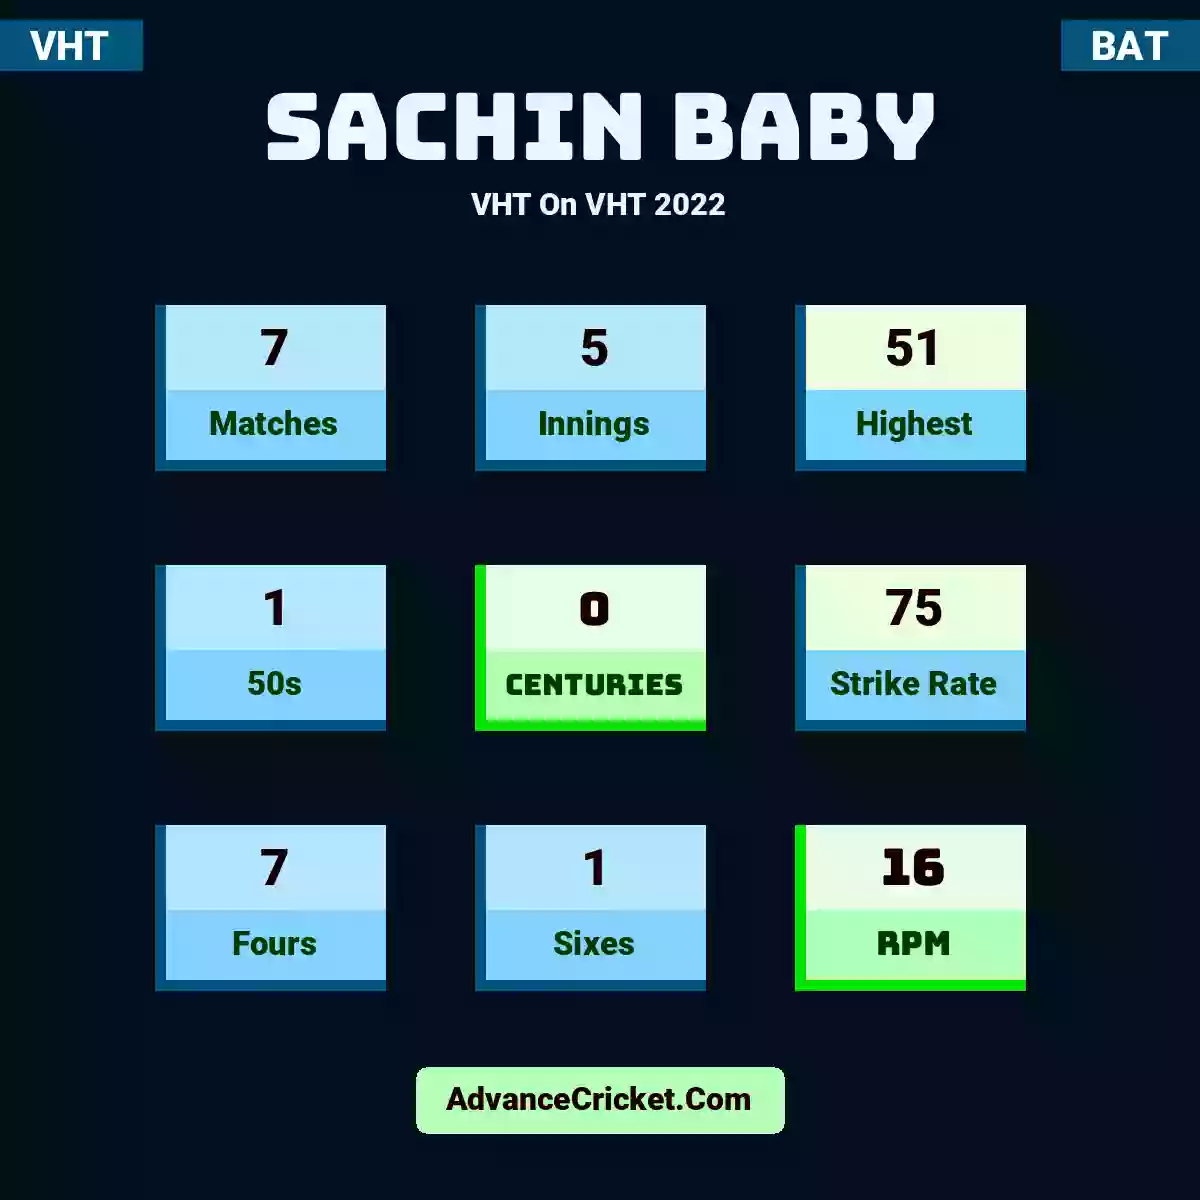 Sachin Baby VHT  On VHT 2022, Sachin Baby played 7 matches, scored 51 runs as highest, 1 half-centuries, and 0 centuries, with a strike rate of 75. S.Baby hit 7 fours and 1 sixes, with an RPM of 16.